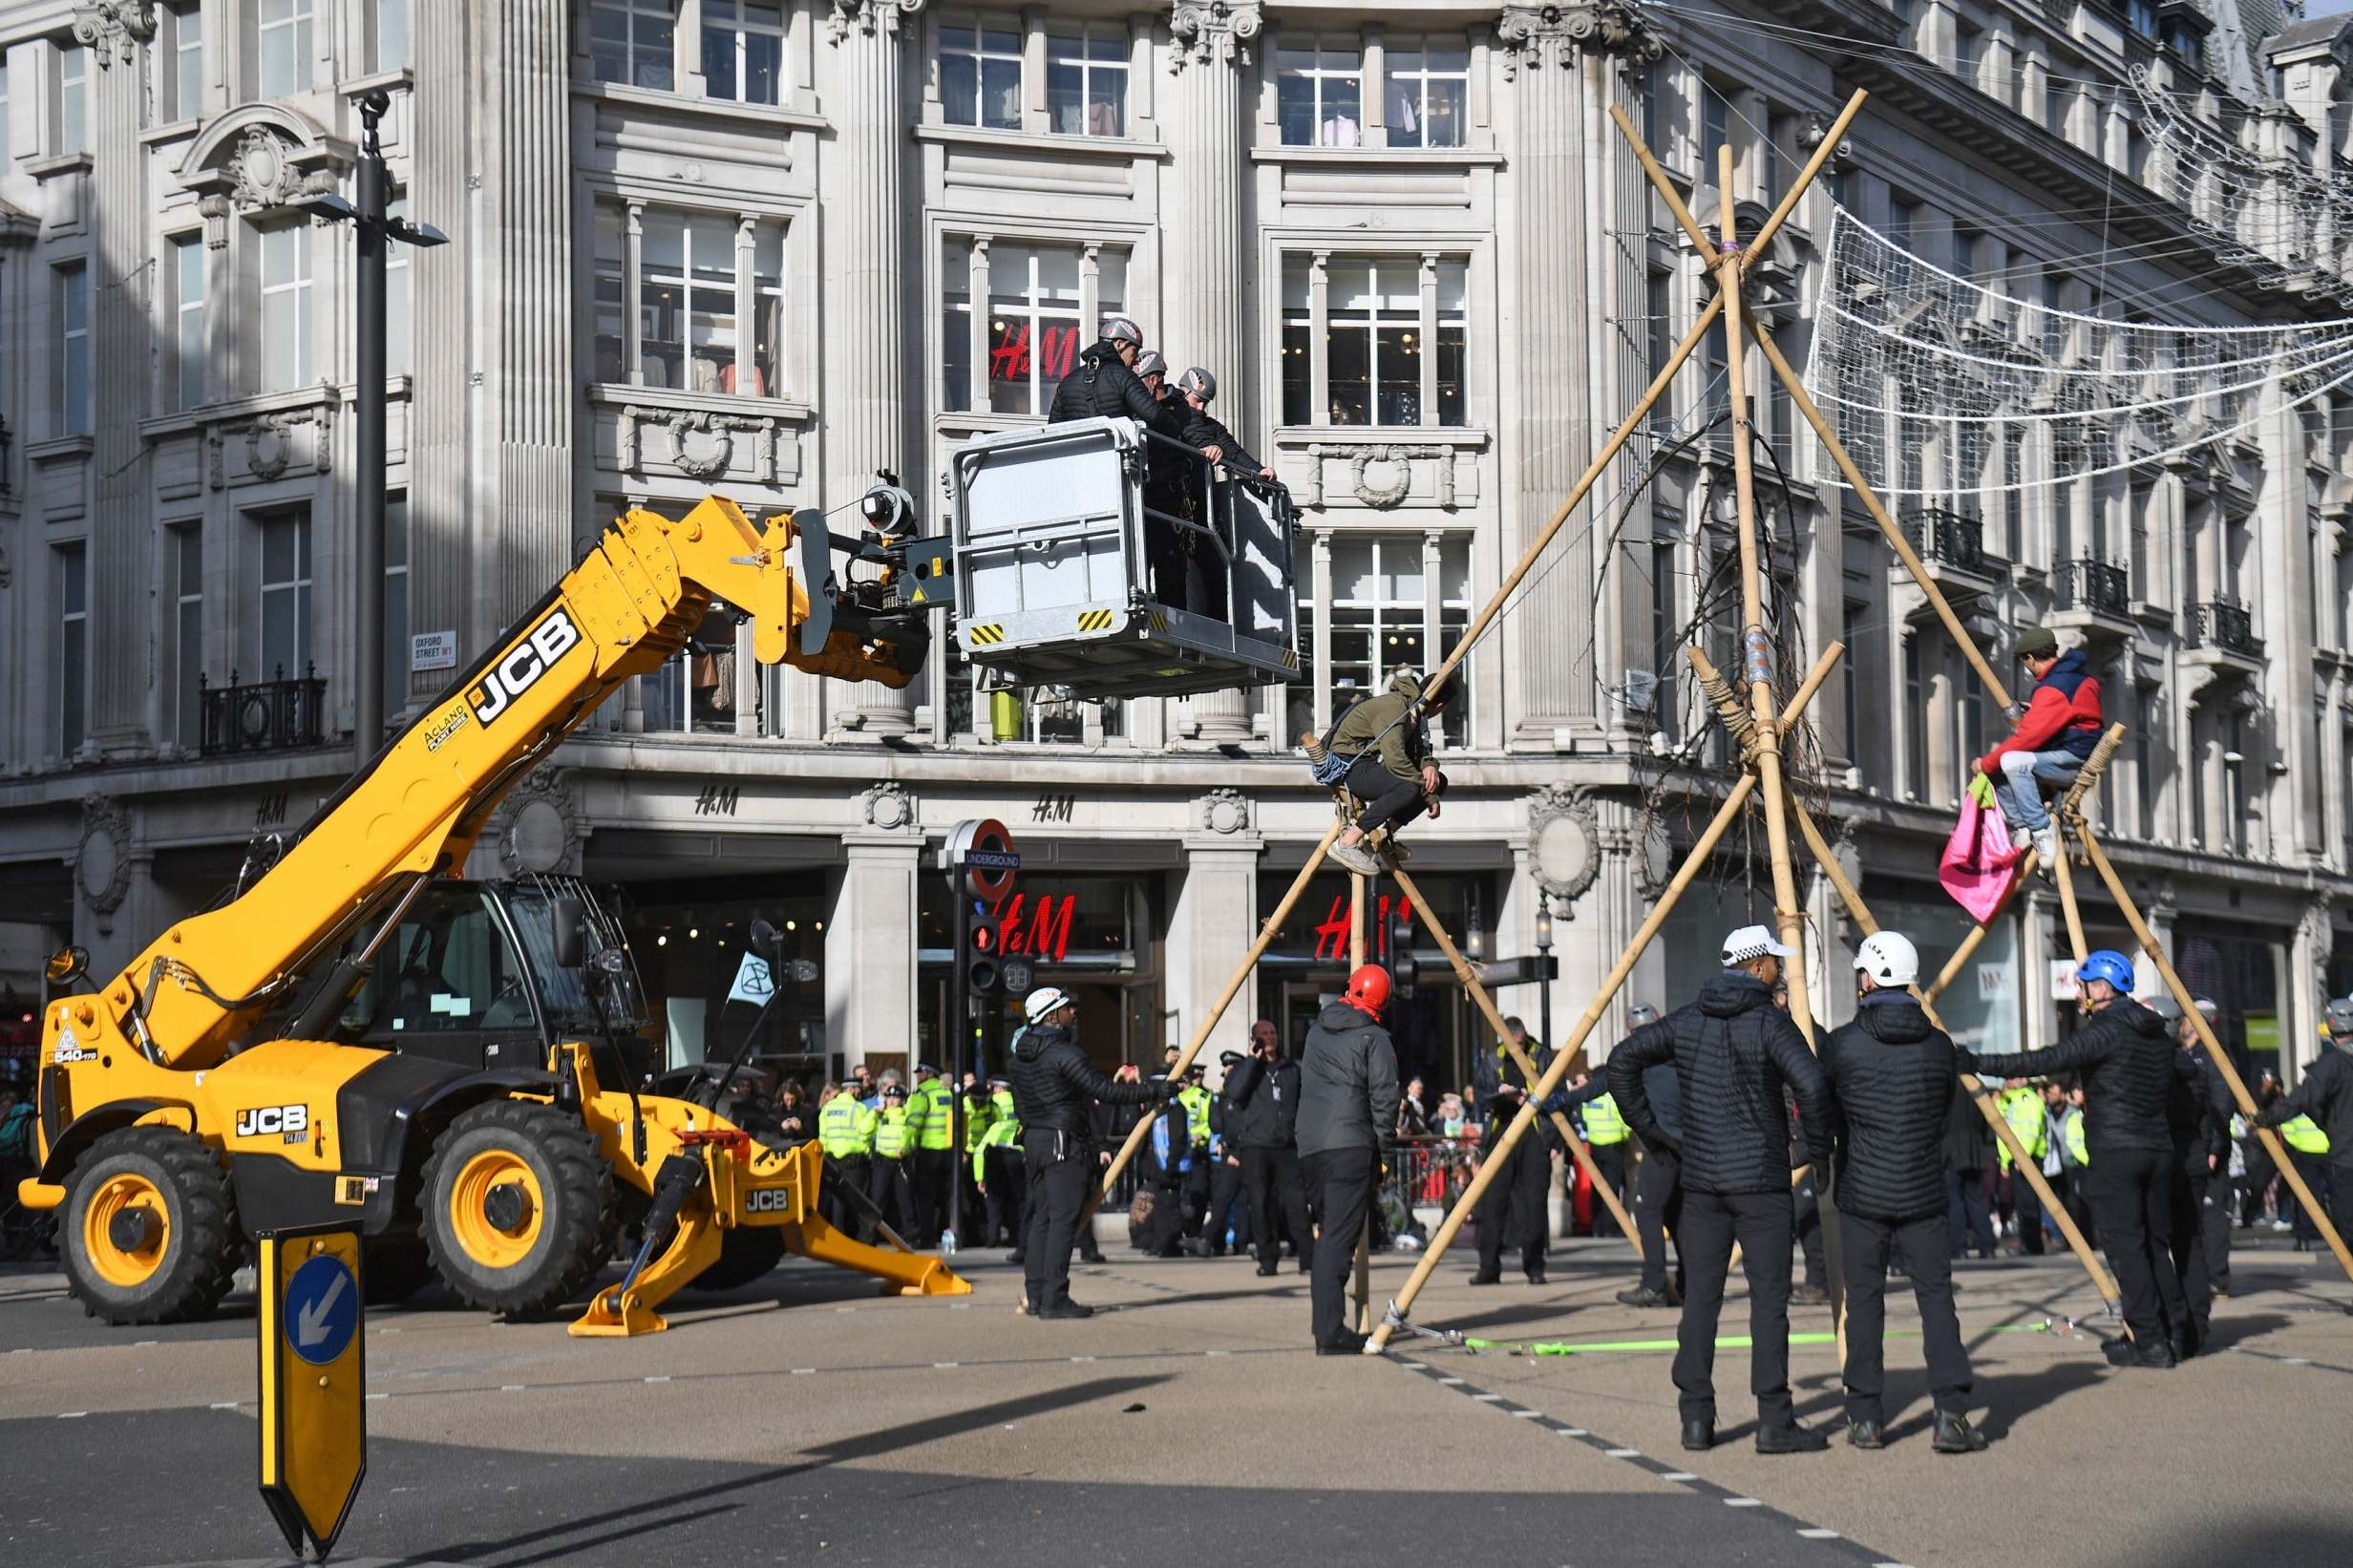 A JCB was used to remove the climate protesters